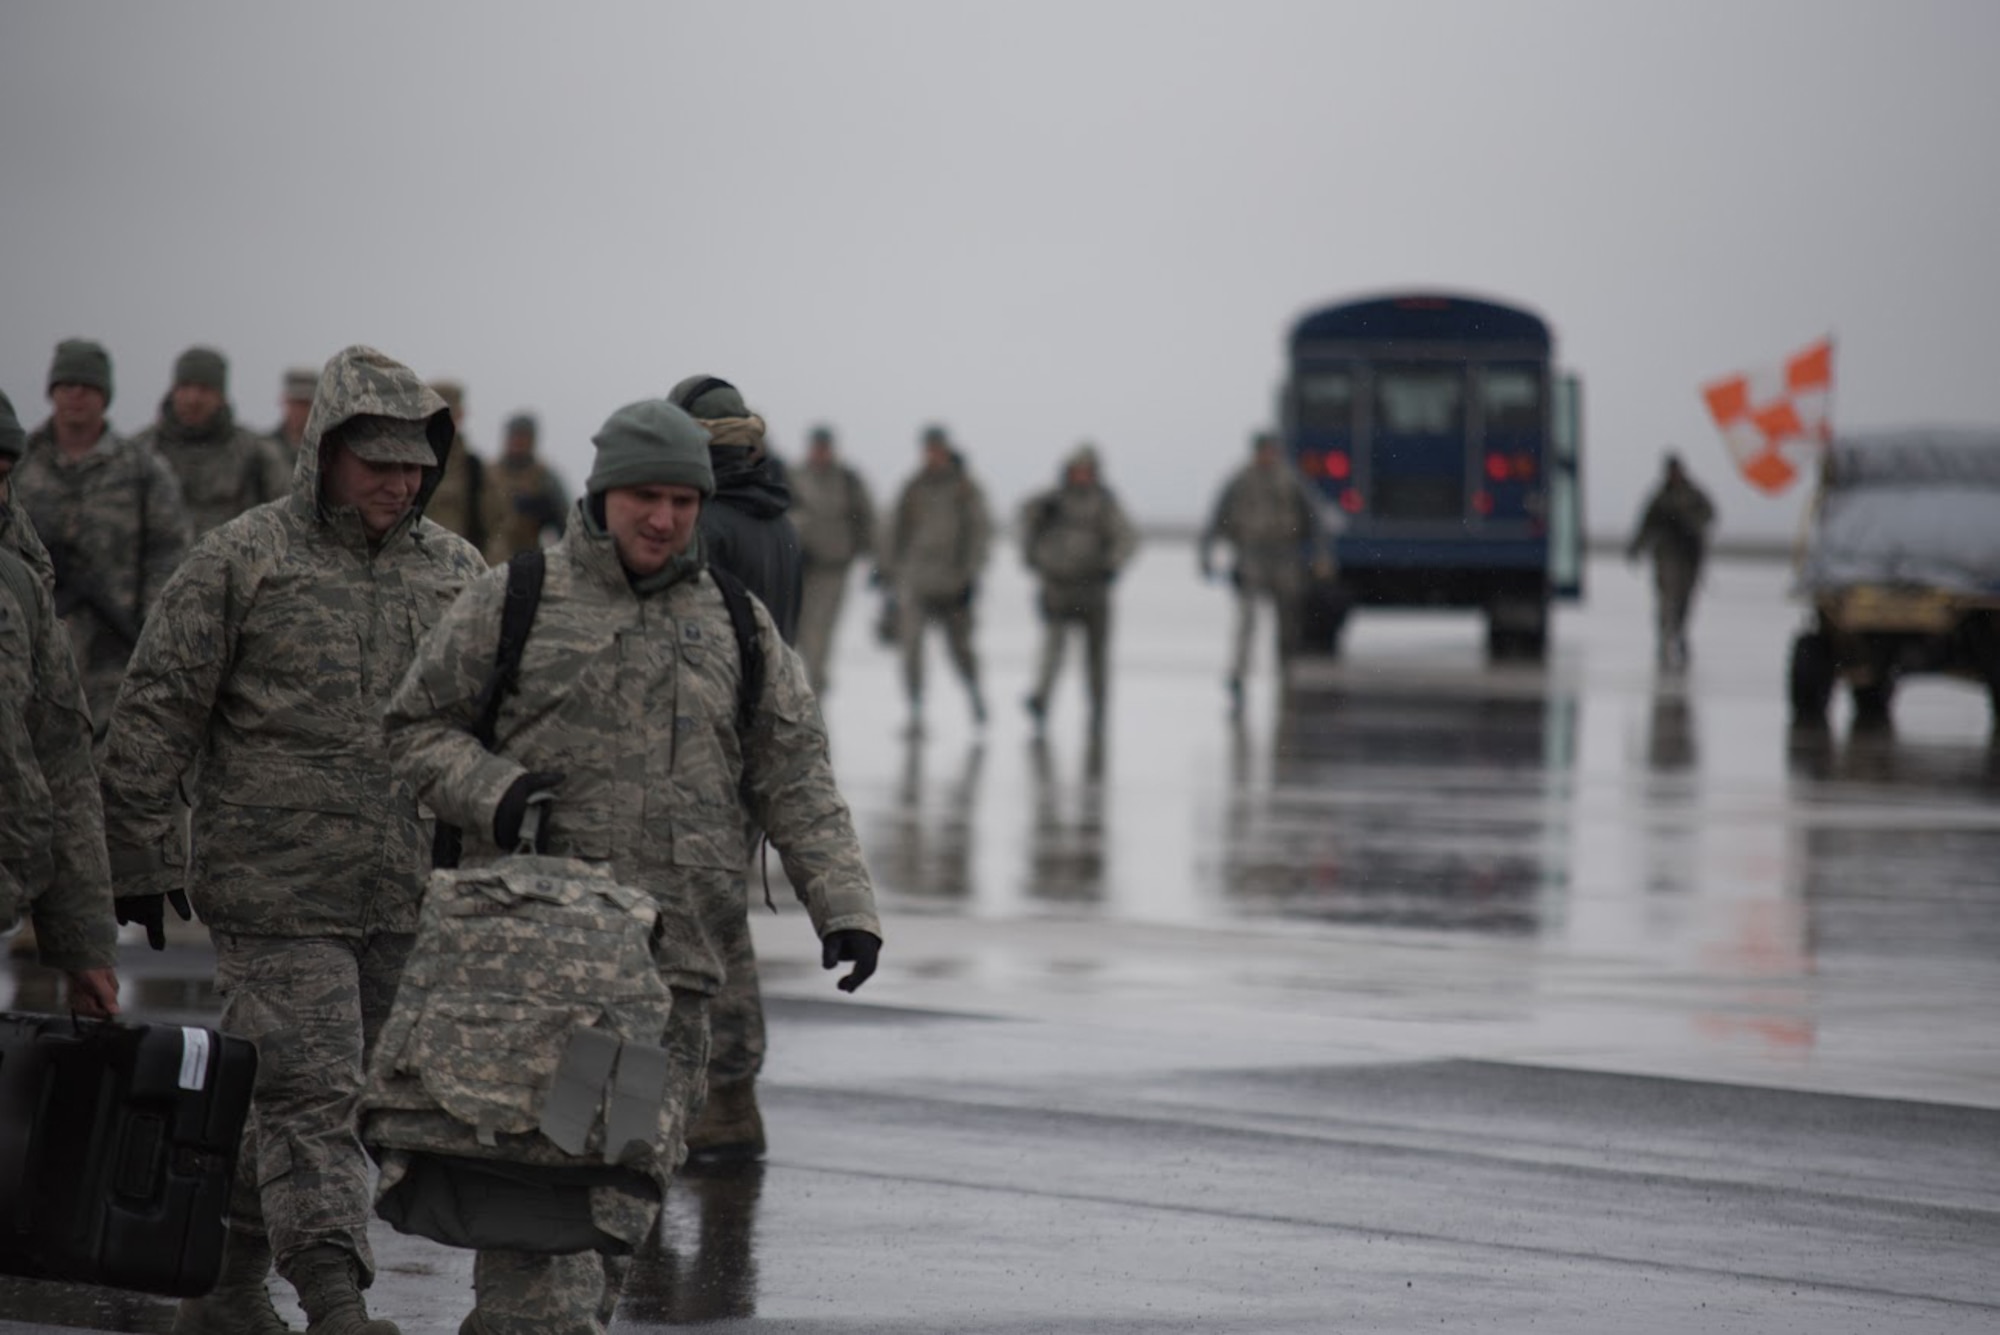 Airmen from the Kentucky Air National Guard’s 123rd Contingency Response Group arrive at Amedee Army Airfield, Calif., during Operation Lumberjack on March 7, 2016. The Kentucky Air National Guard’s 123rd CRG, the U.S. Army’s 688th Rapid Port Opening Element and a team from the Defense Logistics Agency are all participating in the week-long exercise. (Kentucky Air National Guard photo by Master Sgt. Phil Speck)